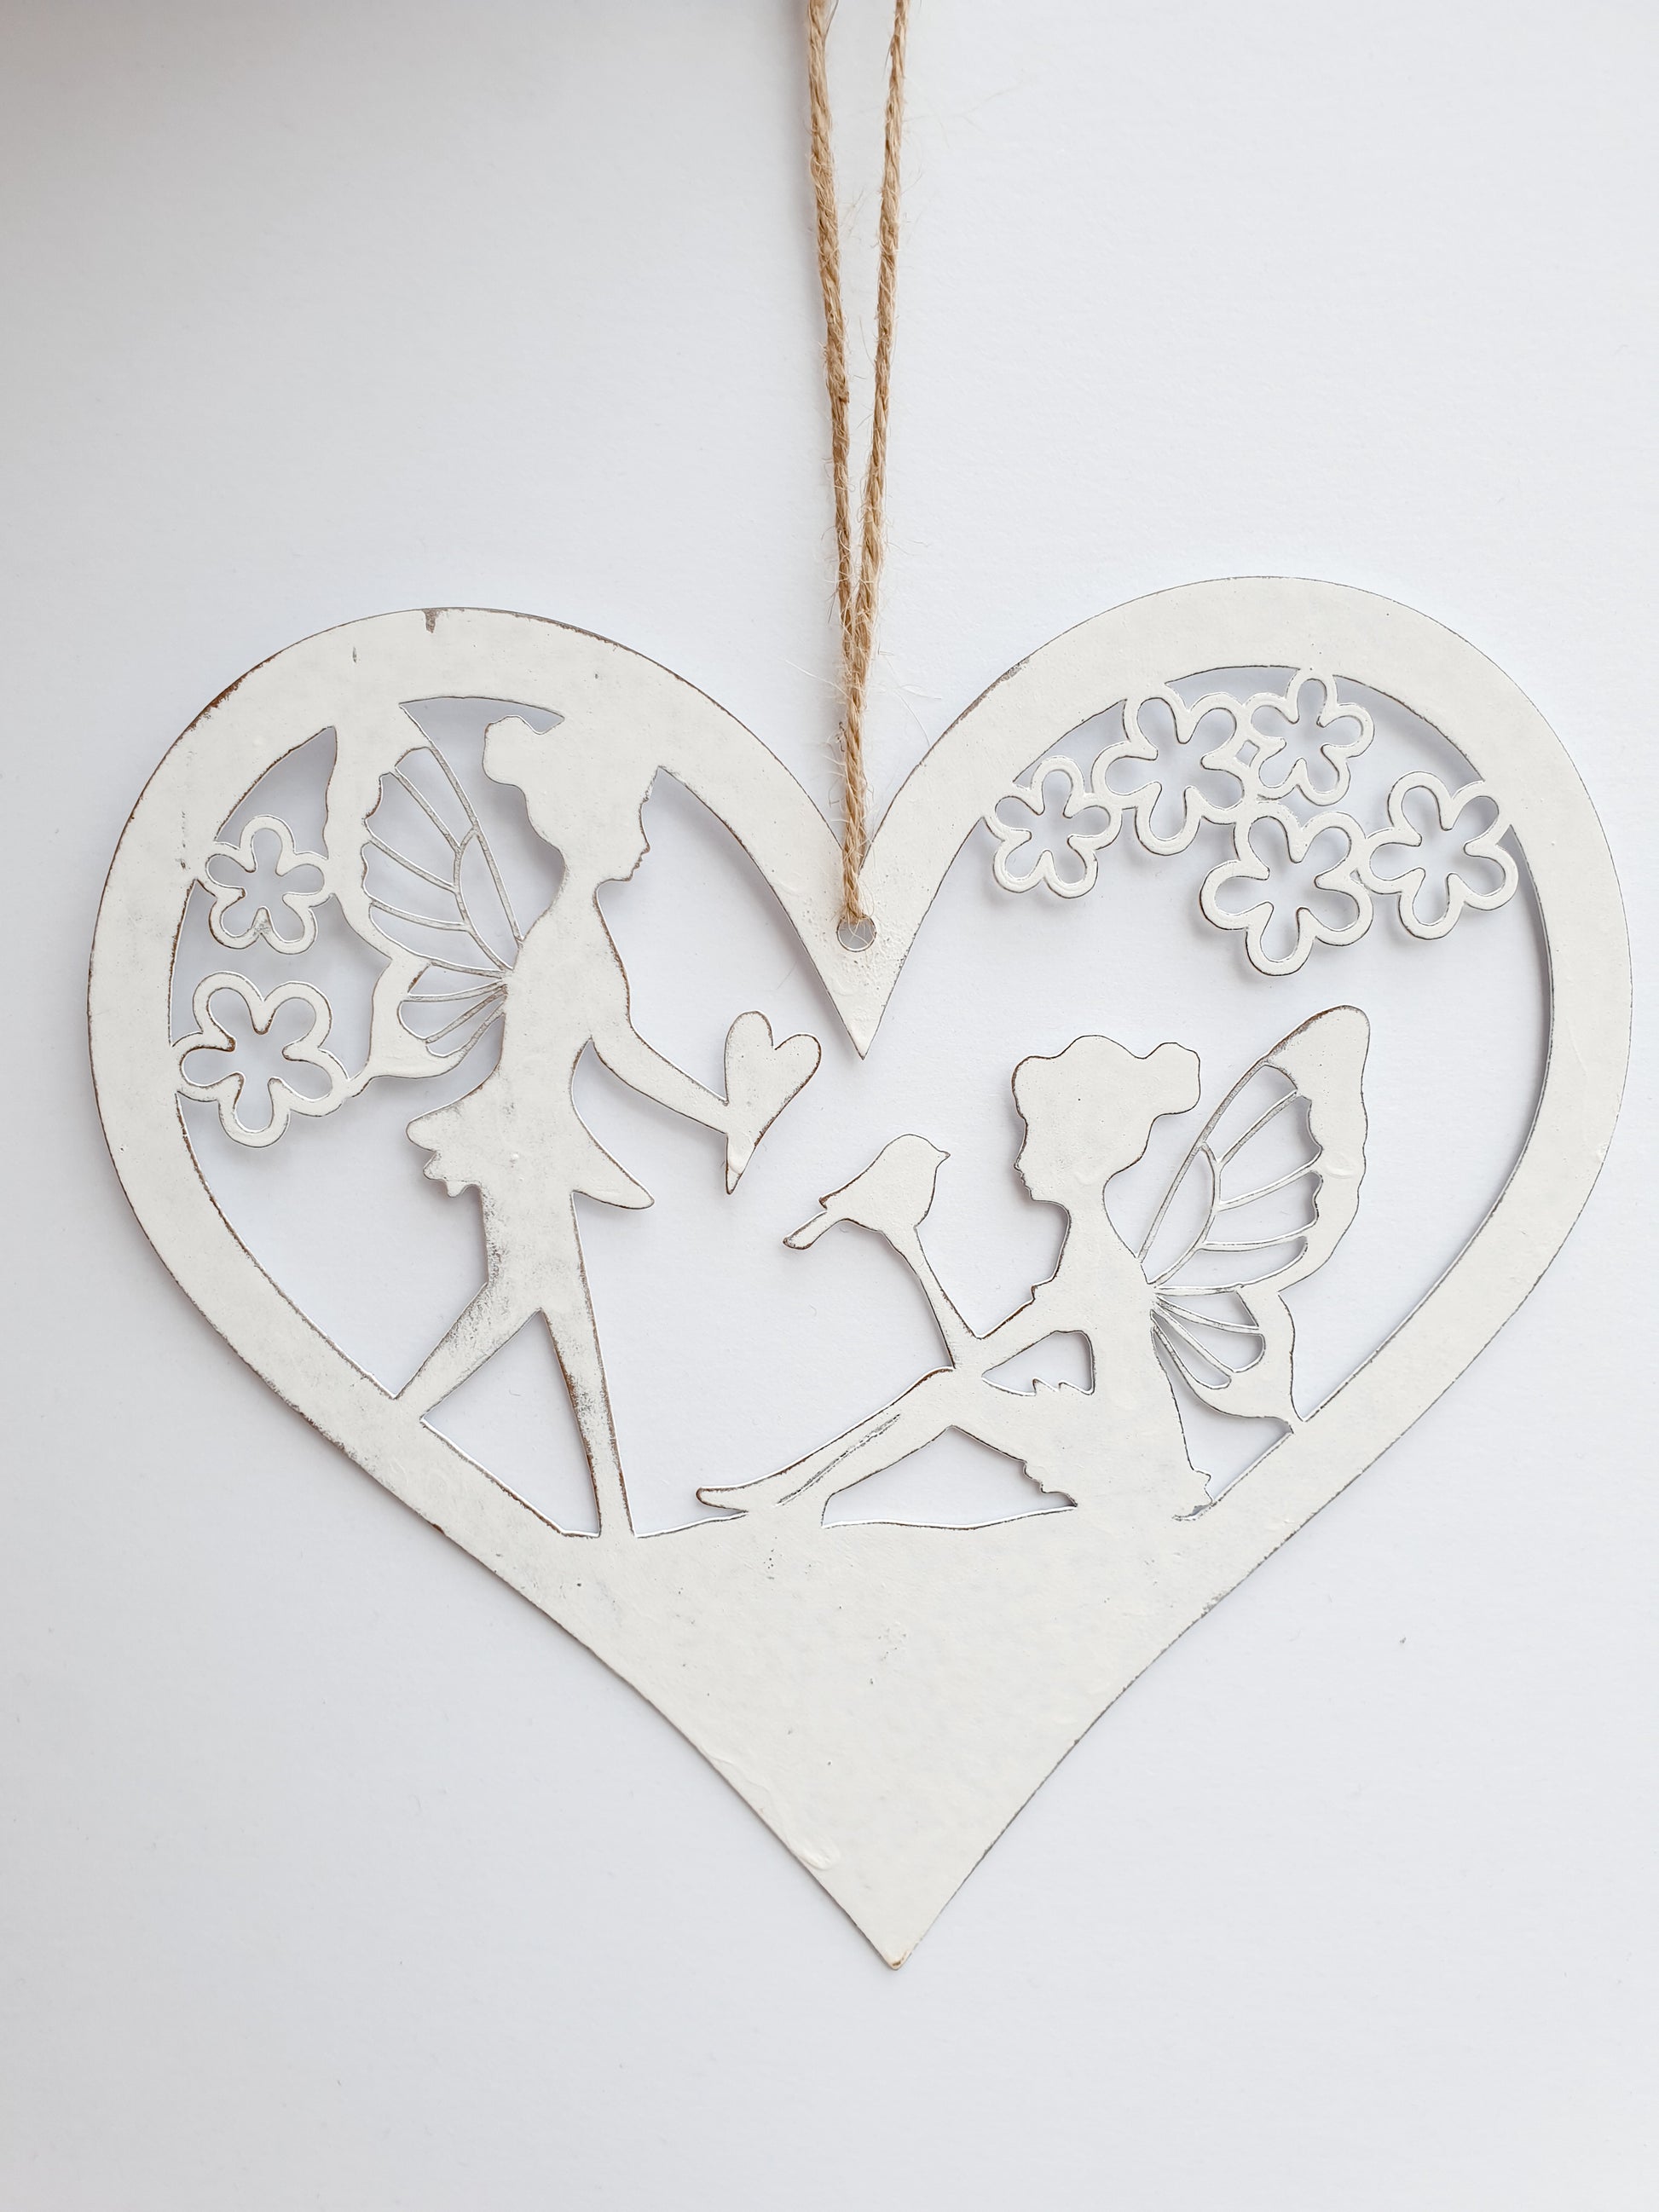 Fairy heart hanger. Metal hanging heart with fairy scene in centre. Beautiful garden decoration for fairy gardens. add magic to your garden wwithour hanging fairy scene heart. pretty whie hanging decoration for the garden. Perfect gift for grandchildren, nieces, nephews, sons and daughters - creating a magical garden for all the family to enjoy.